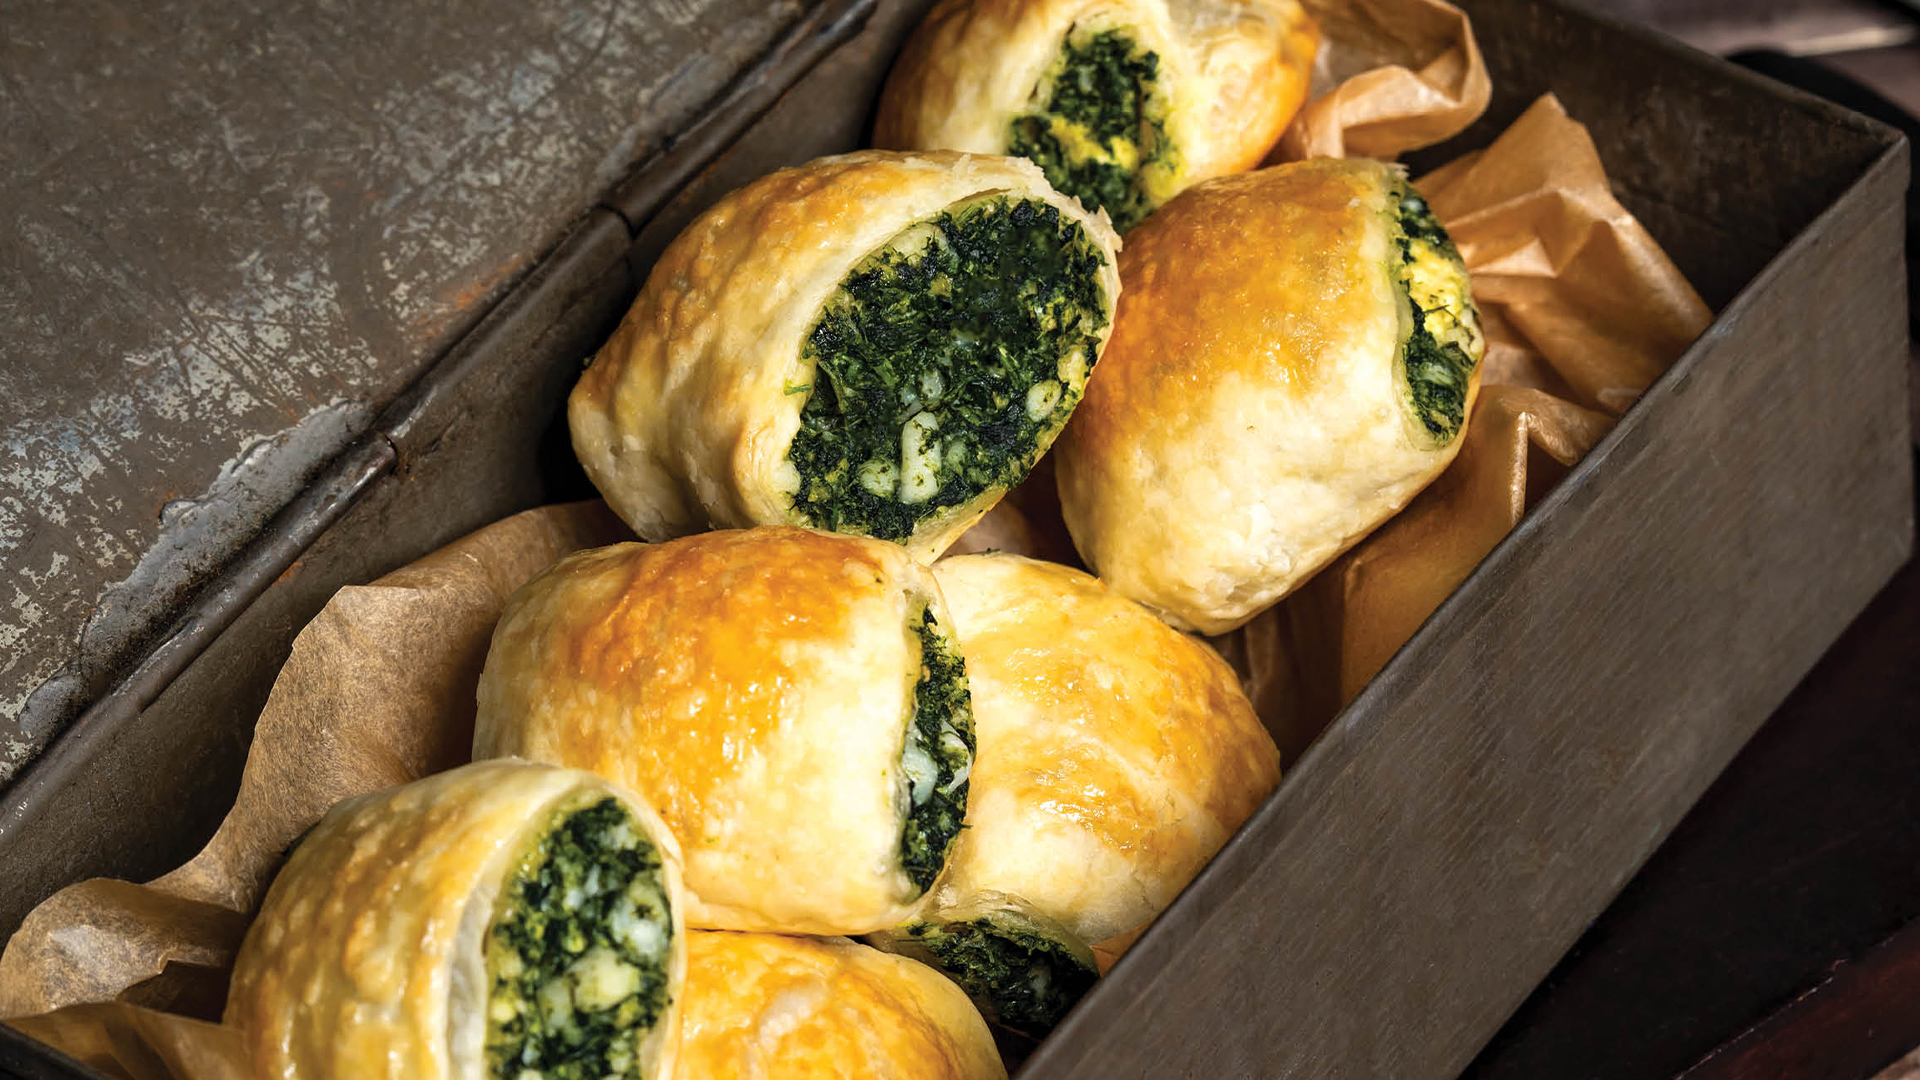 Puffed and stuffed  spinach pastries